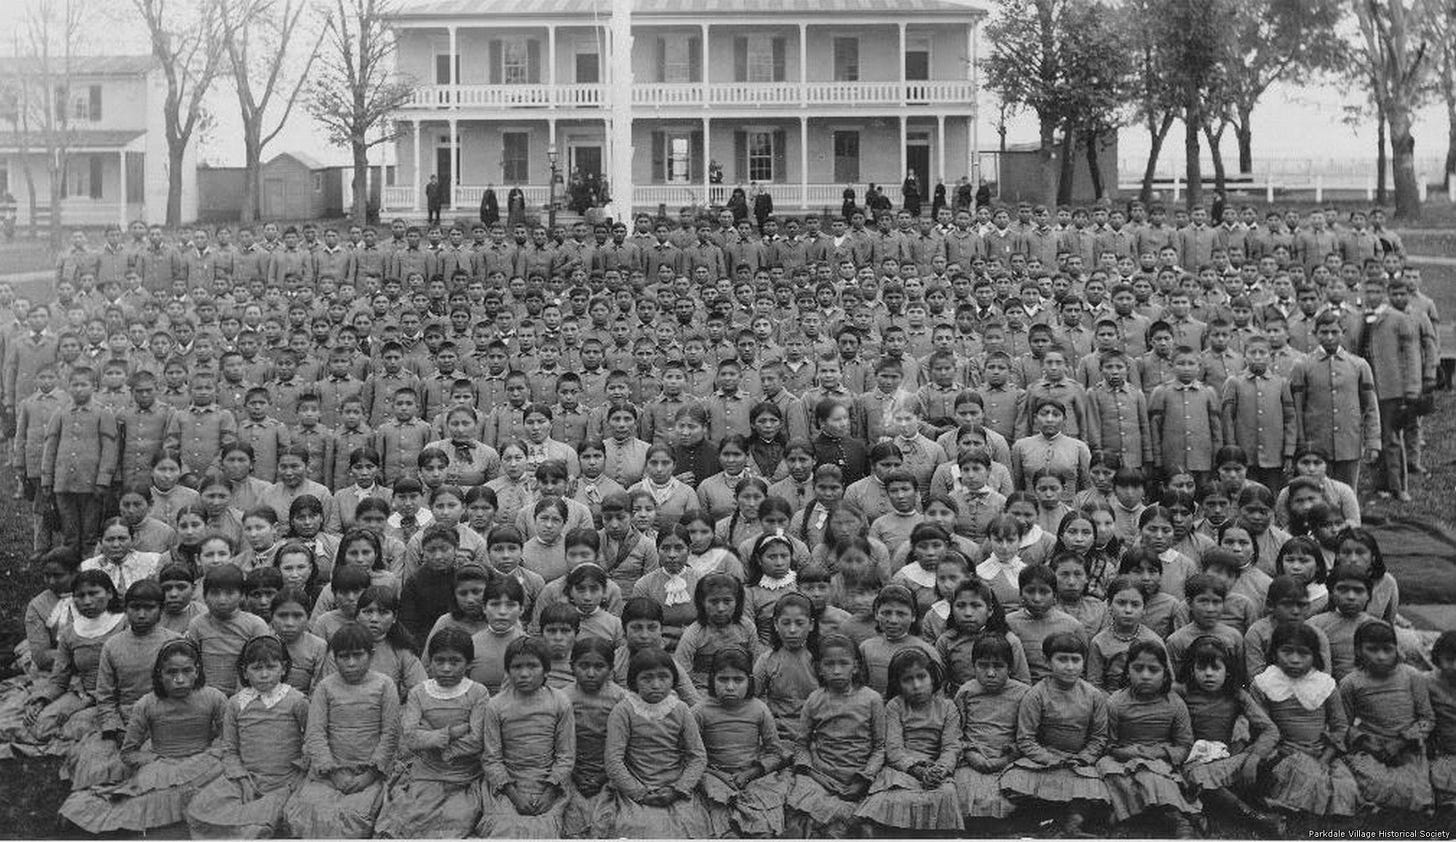 American Genocide: the violent removal of Native American children from their families and culture.